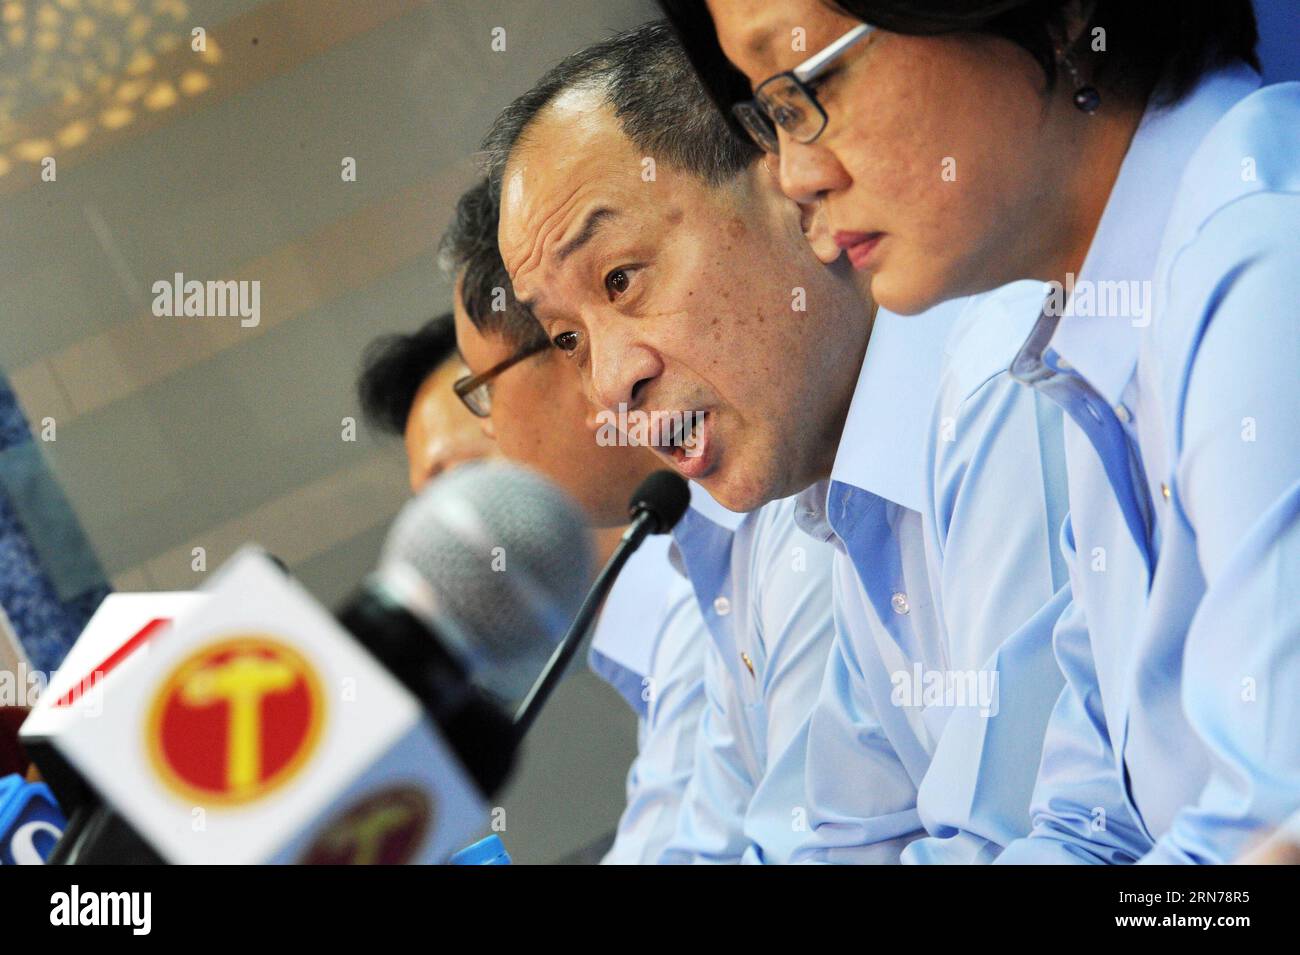 (150826) -- SINGAPORE, Aug. 26, 2015 -- Singapore s Workers Party (WP) s Secretary-General Low Thia Khiang (2nd R) and chairman Sylvia Lim (1st R) attend a press conference held in the WP s head office on Aug. 26, 2015. The WP held a press conference in Singapore on Wednesday to introduce four new candidates contesting in the upcoming general elections. ) (lrz) SINGAPORE-WORKERS PARTY-PRESS CONFERENCE-NEW CANDIDATES ThenxChihxWey PUBLICATIONxNOTxINxCHN   150826 Singapore Aug 26 2015 Singapore S Workers Party wp S Secretary General Low Thia Khiang 2nd r and Chairman Sylvia Lim 1st r attend a Pr Stock Photo